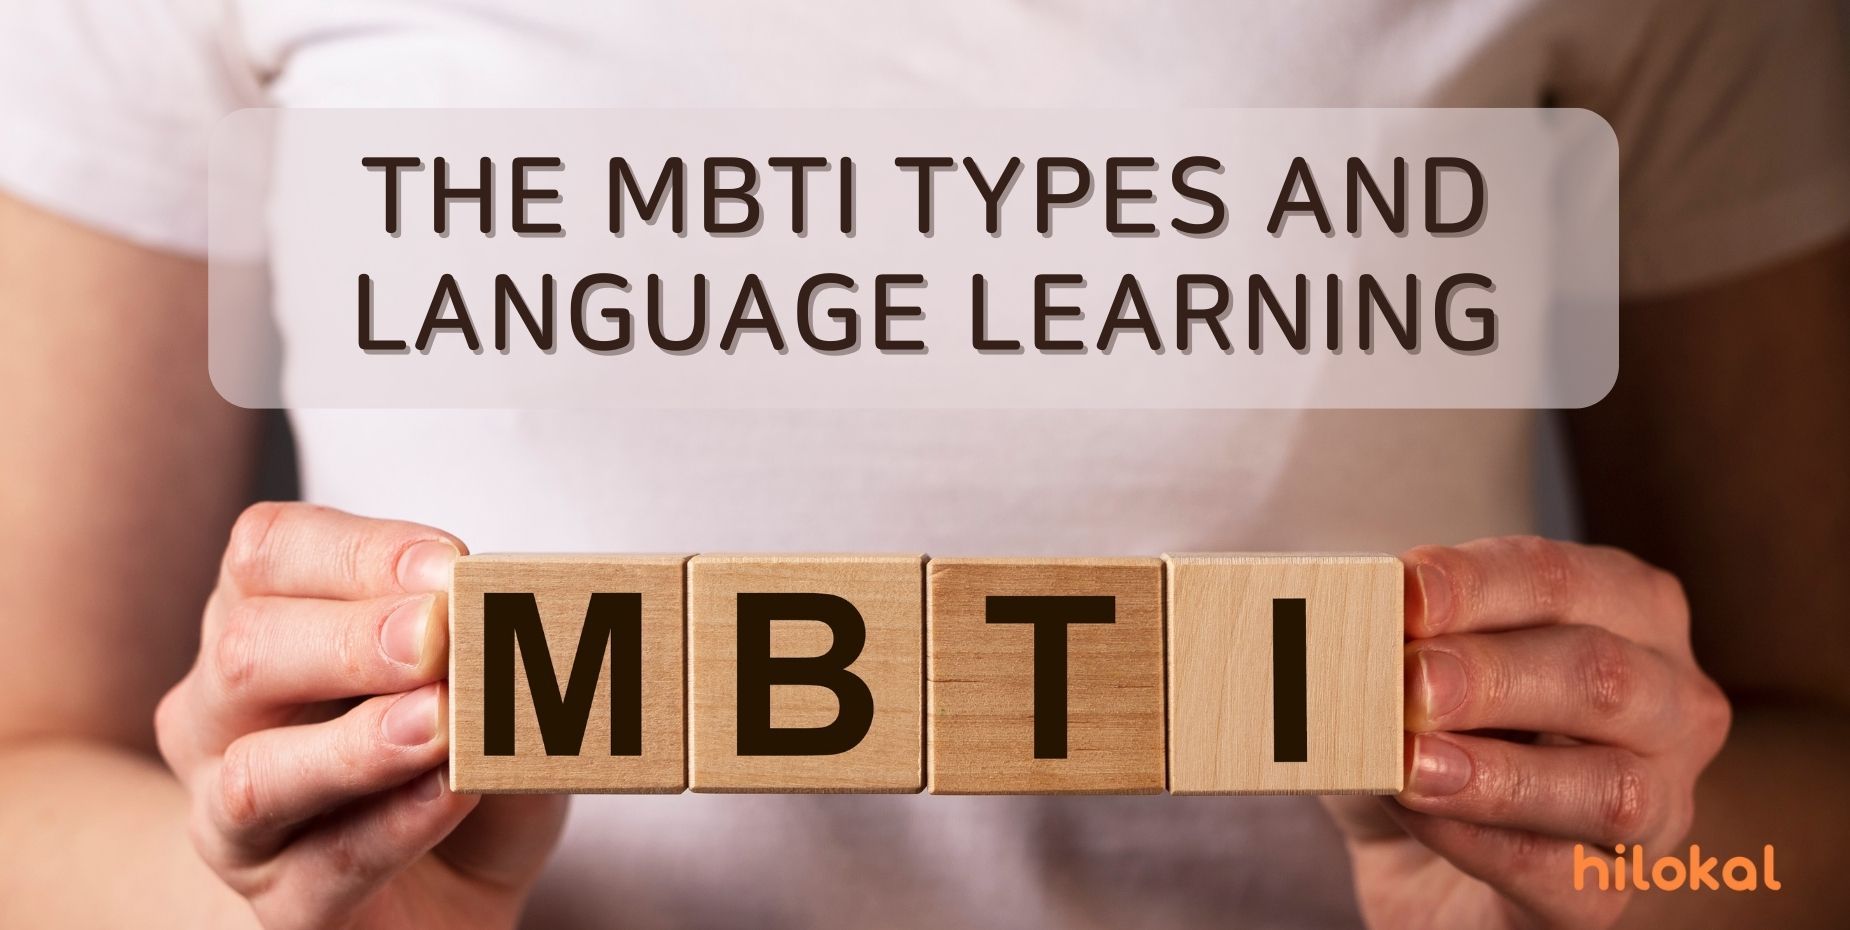 Your love language according to your MBTI